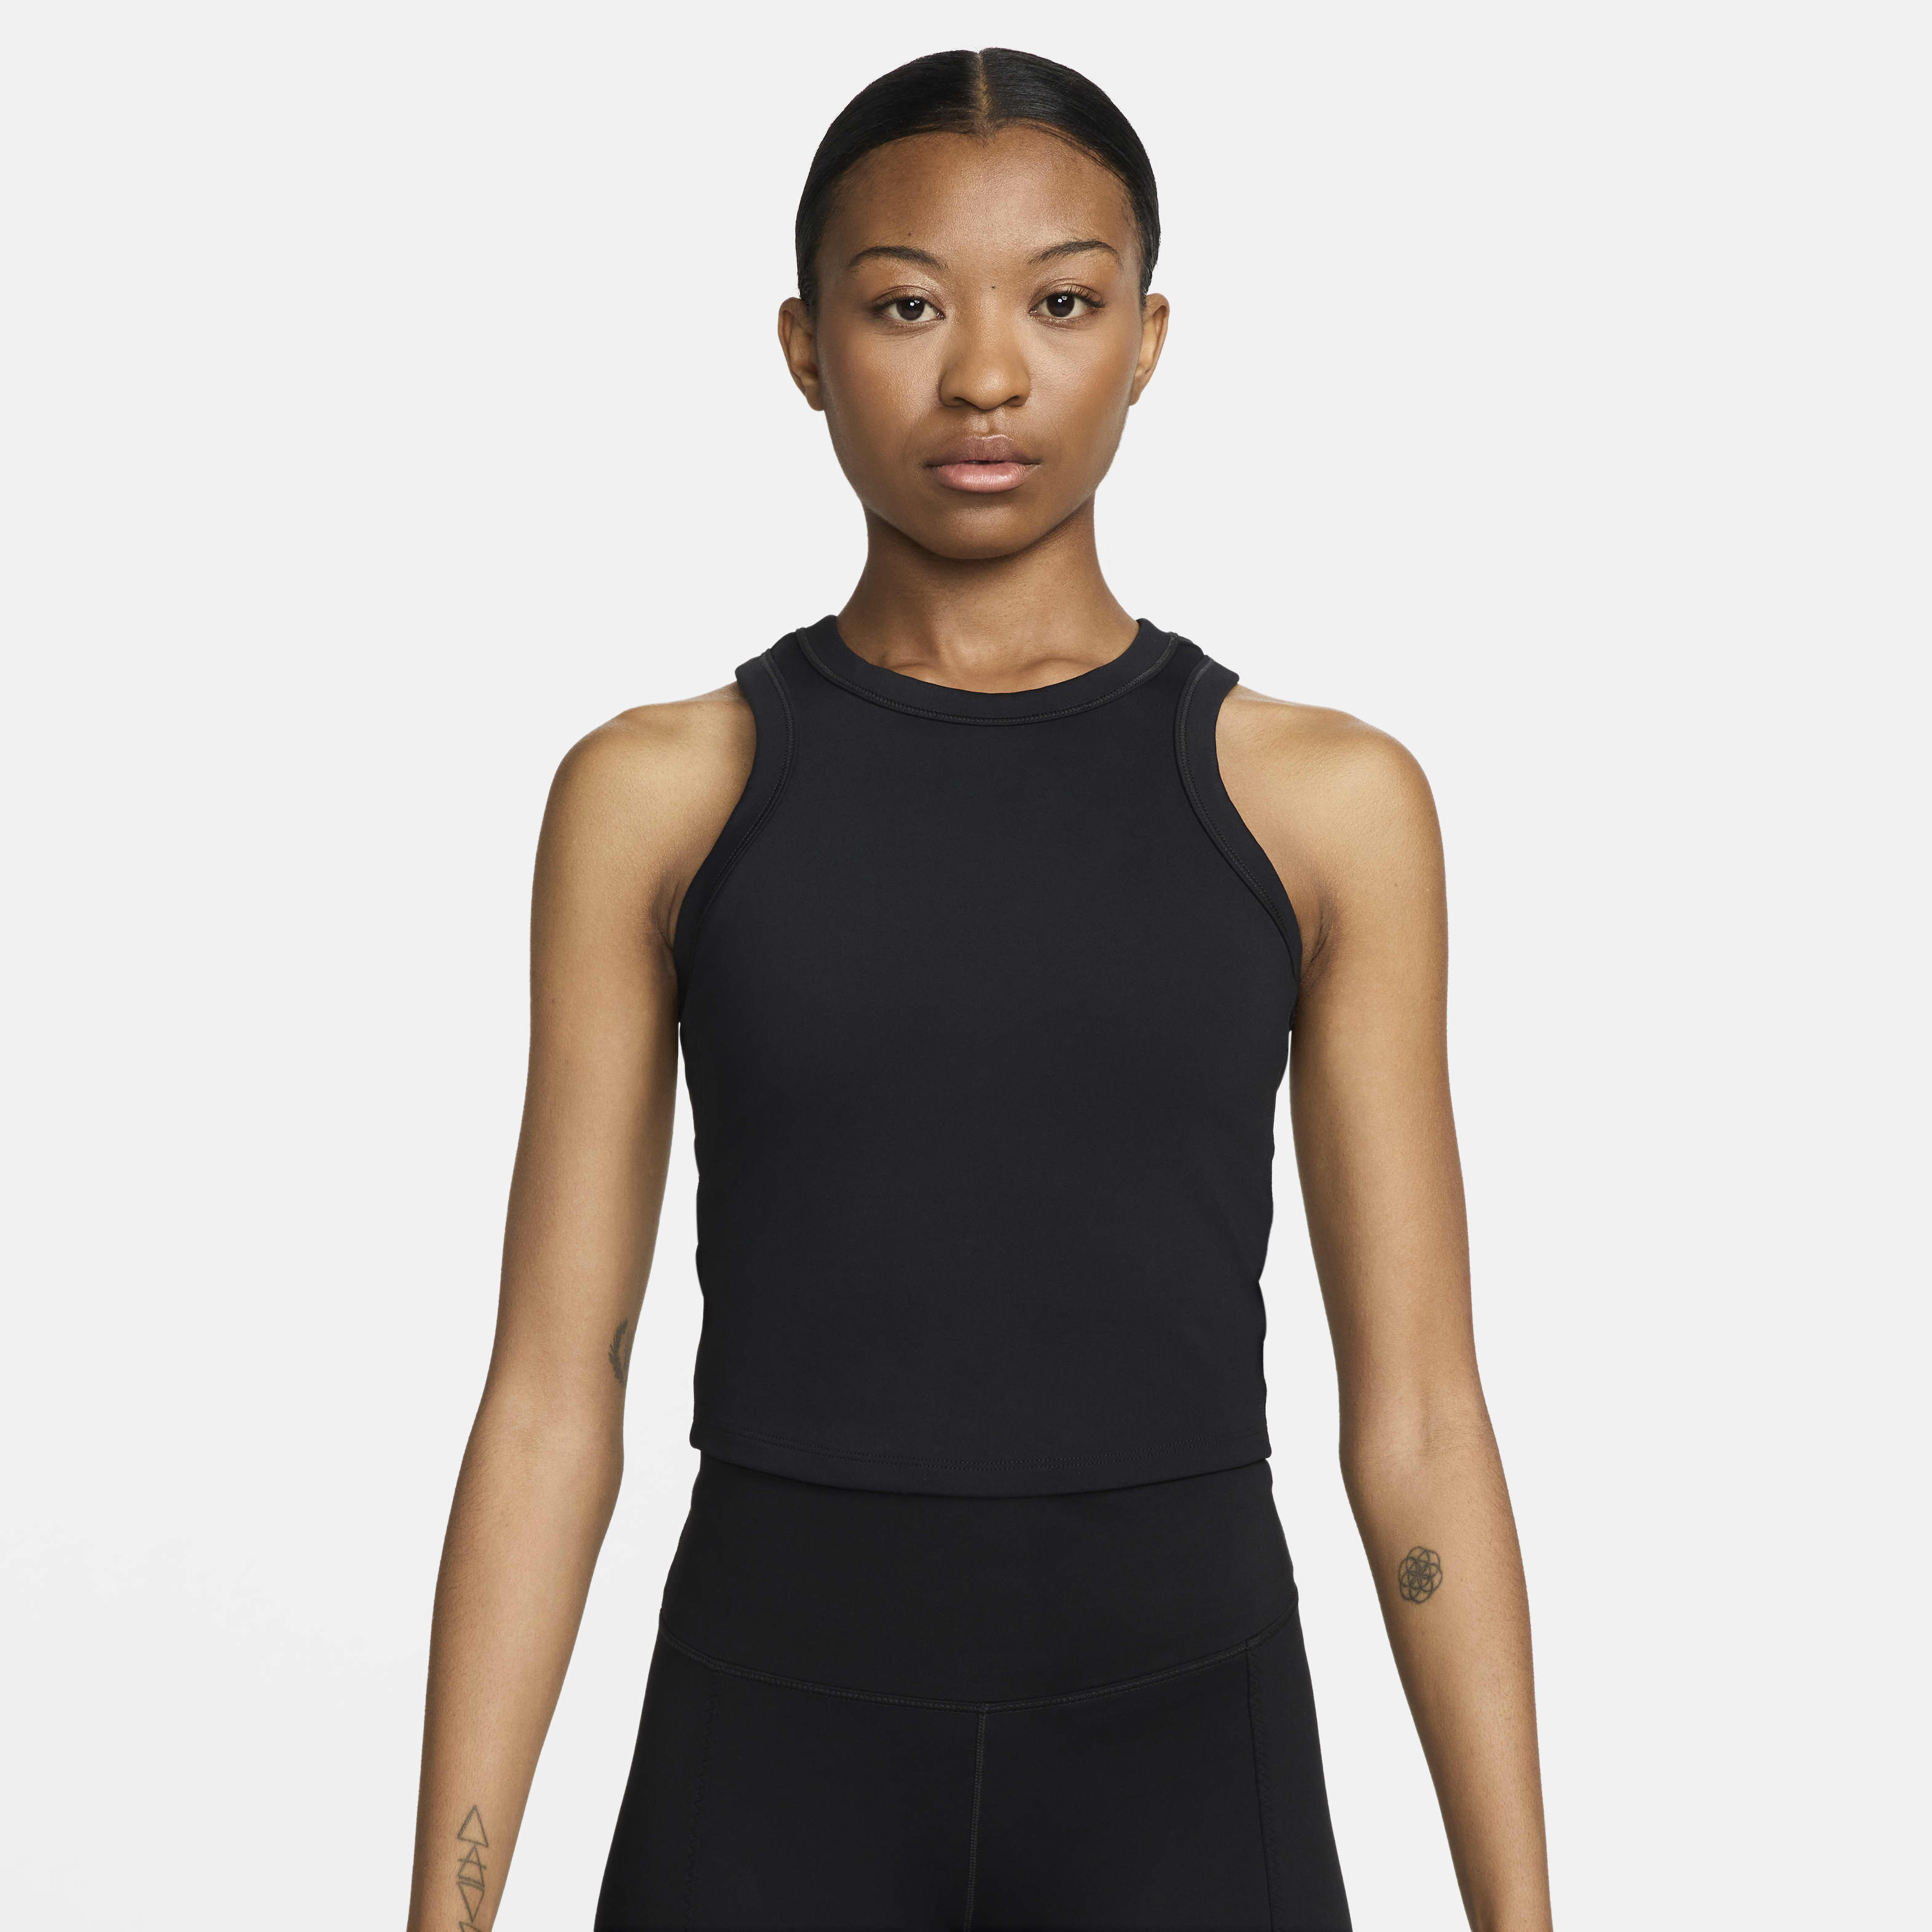 Nike One Fitted Women's Dri-FIT Cropped Tank Top